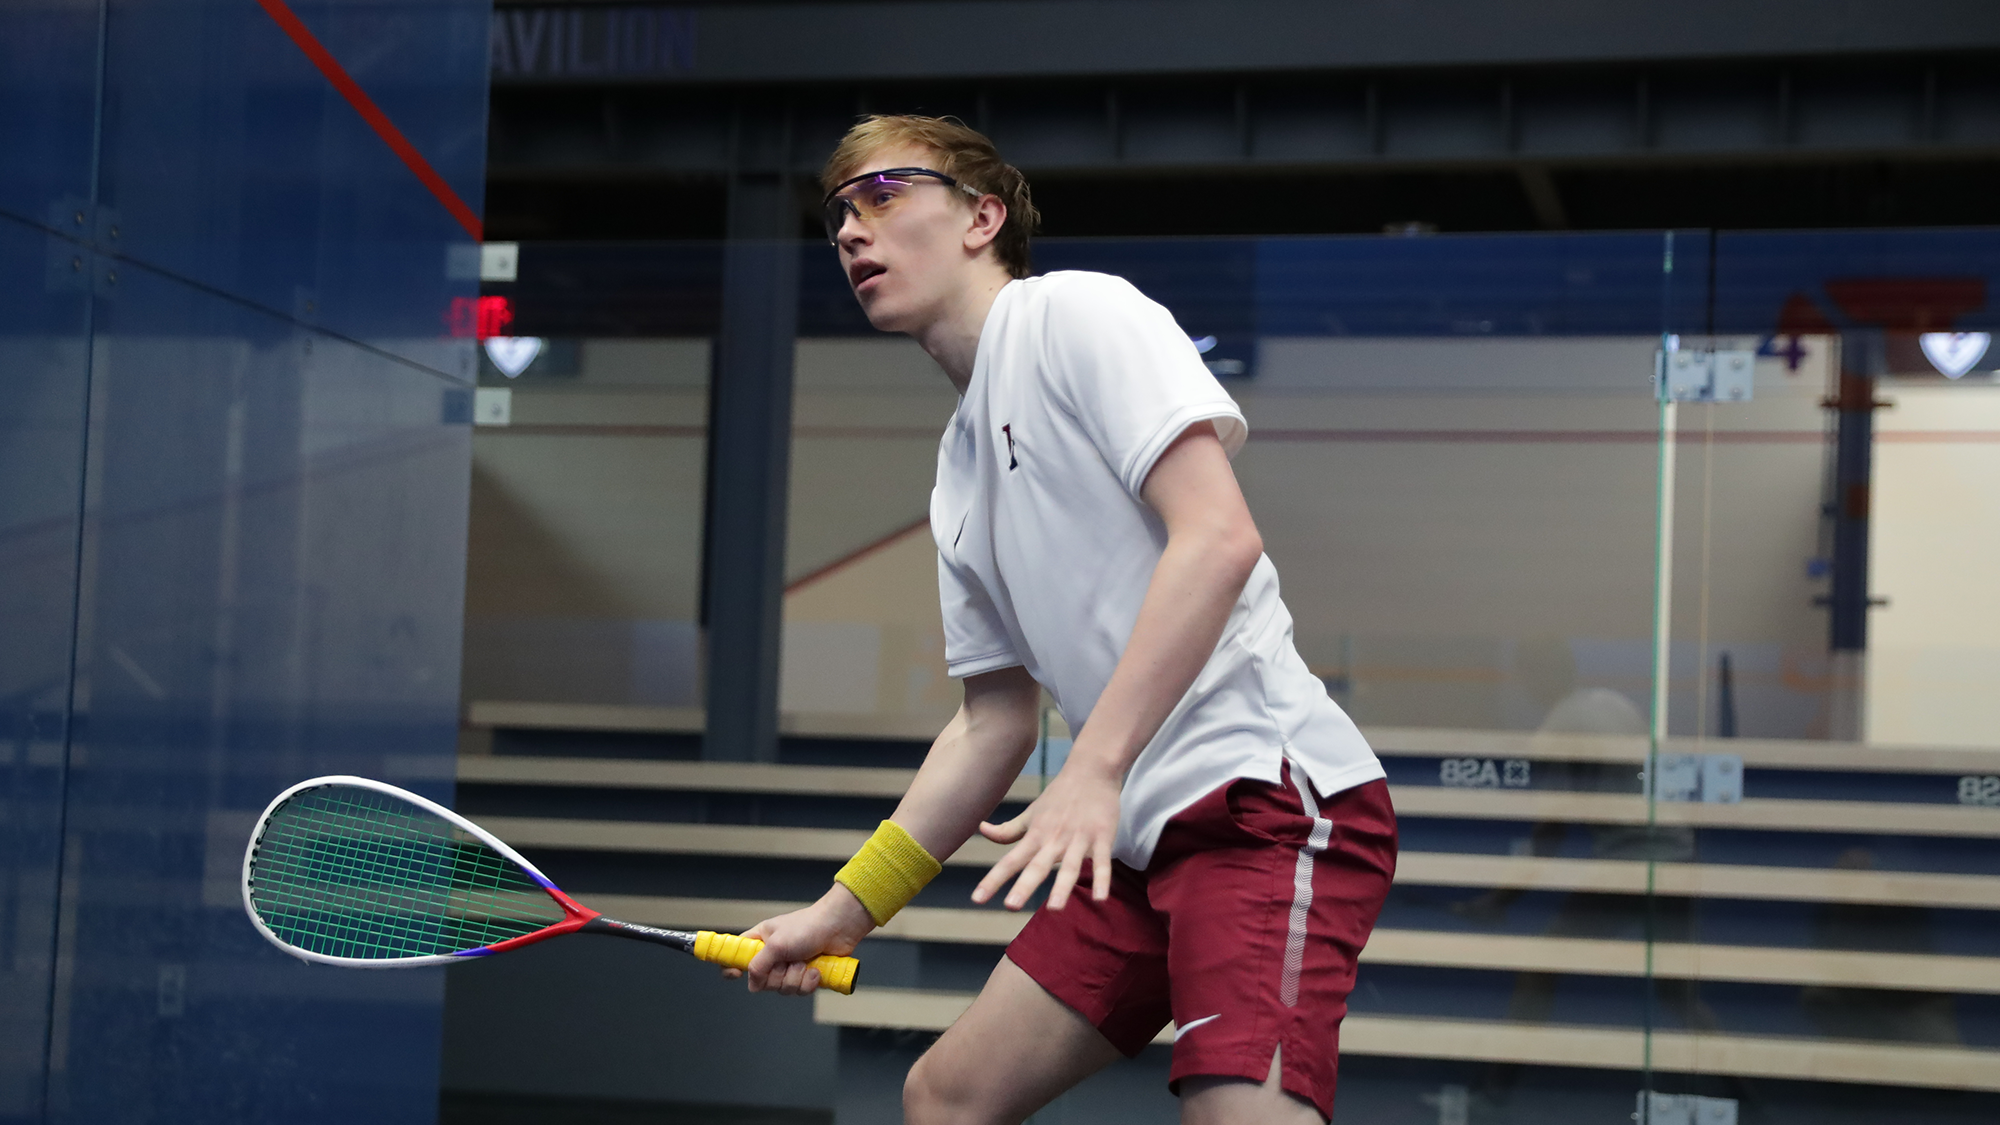 Andrew Douglas stands with his racquet extended to the left during a squash match.